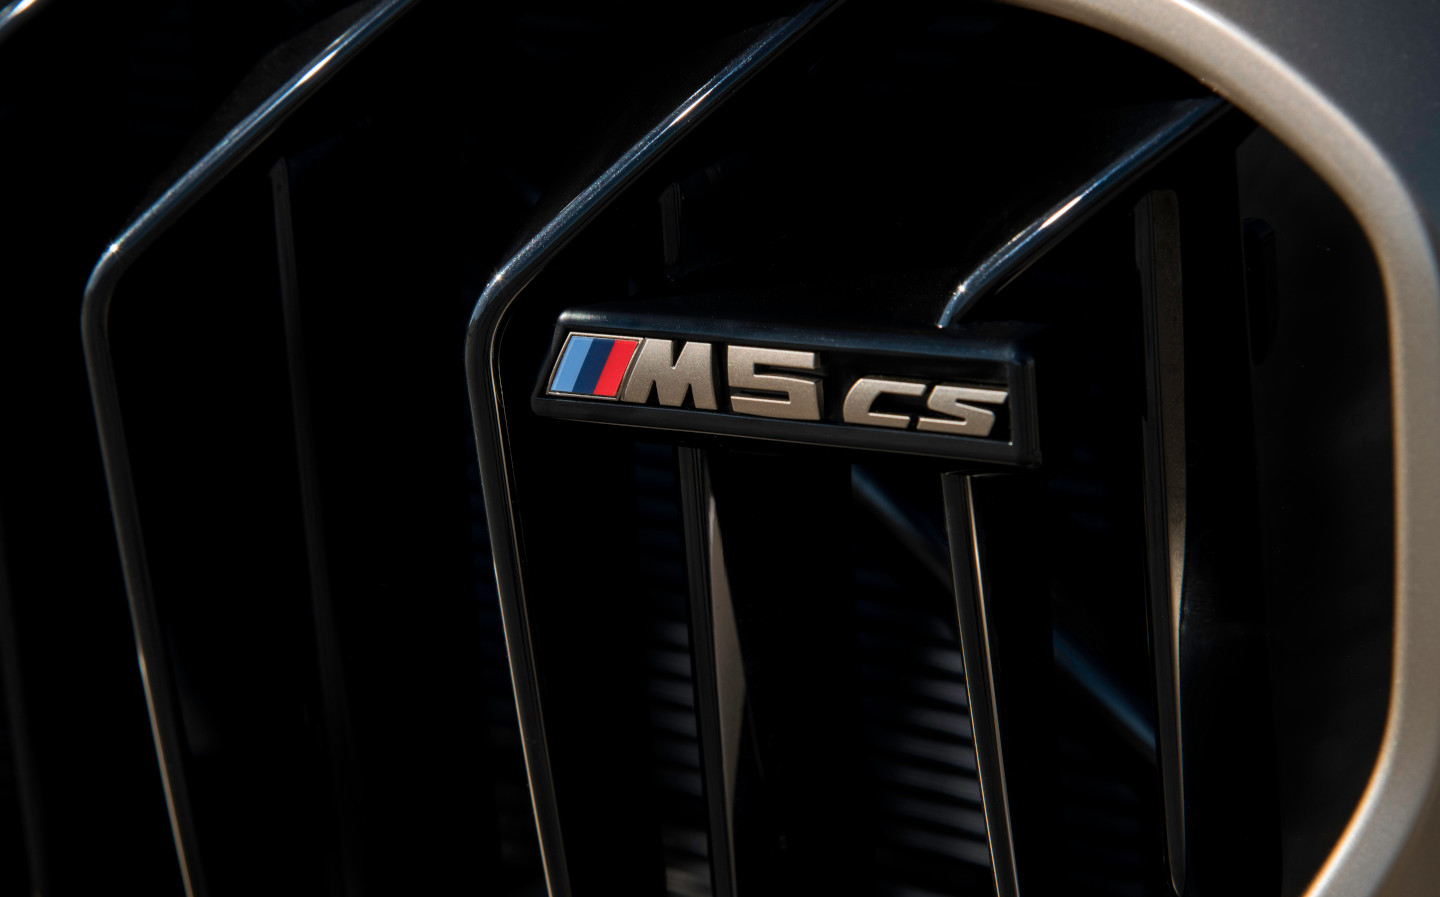 BMW M5 CS is the most powerful production BMW M car ever made